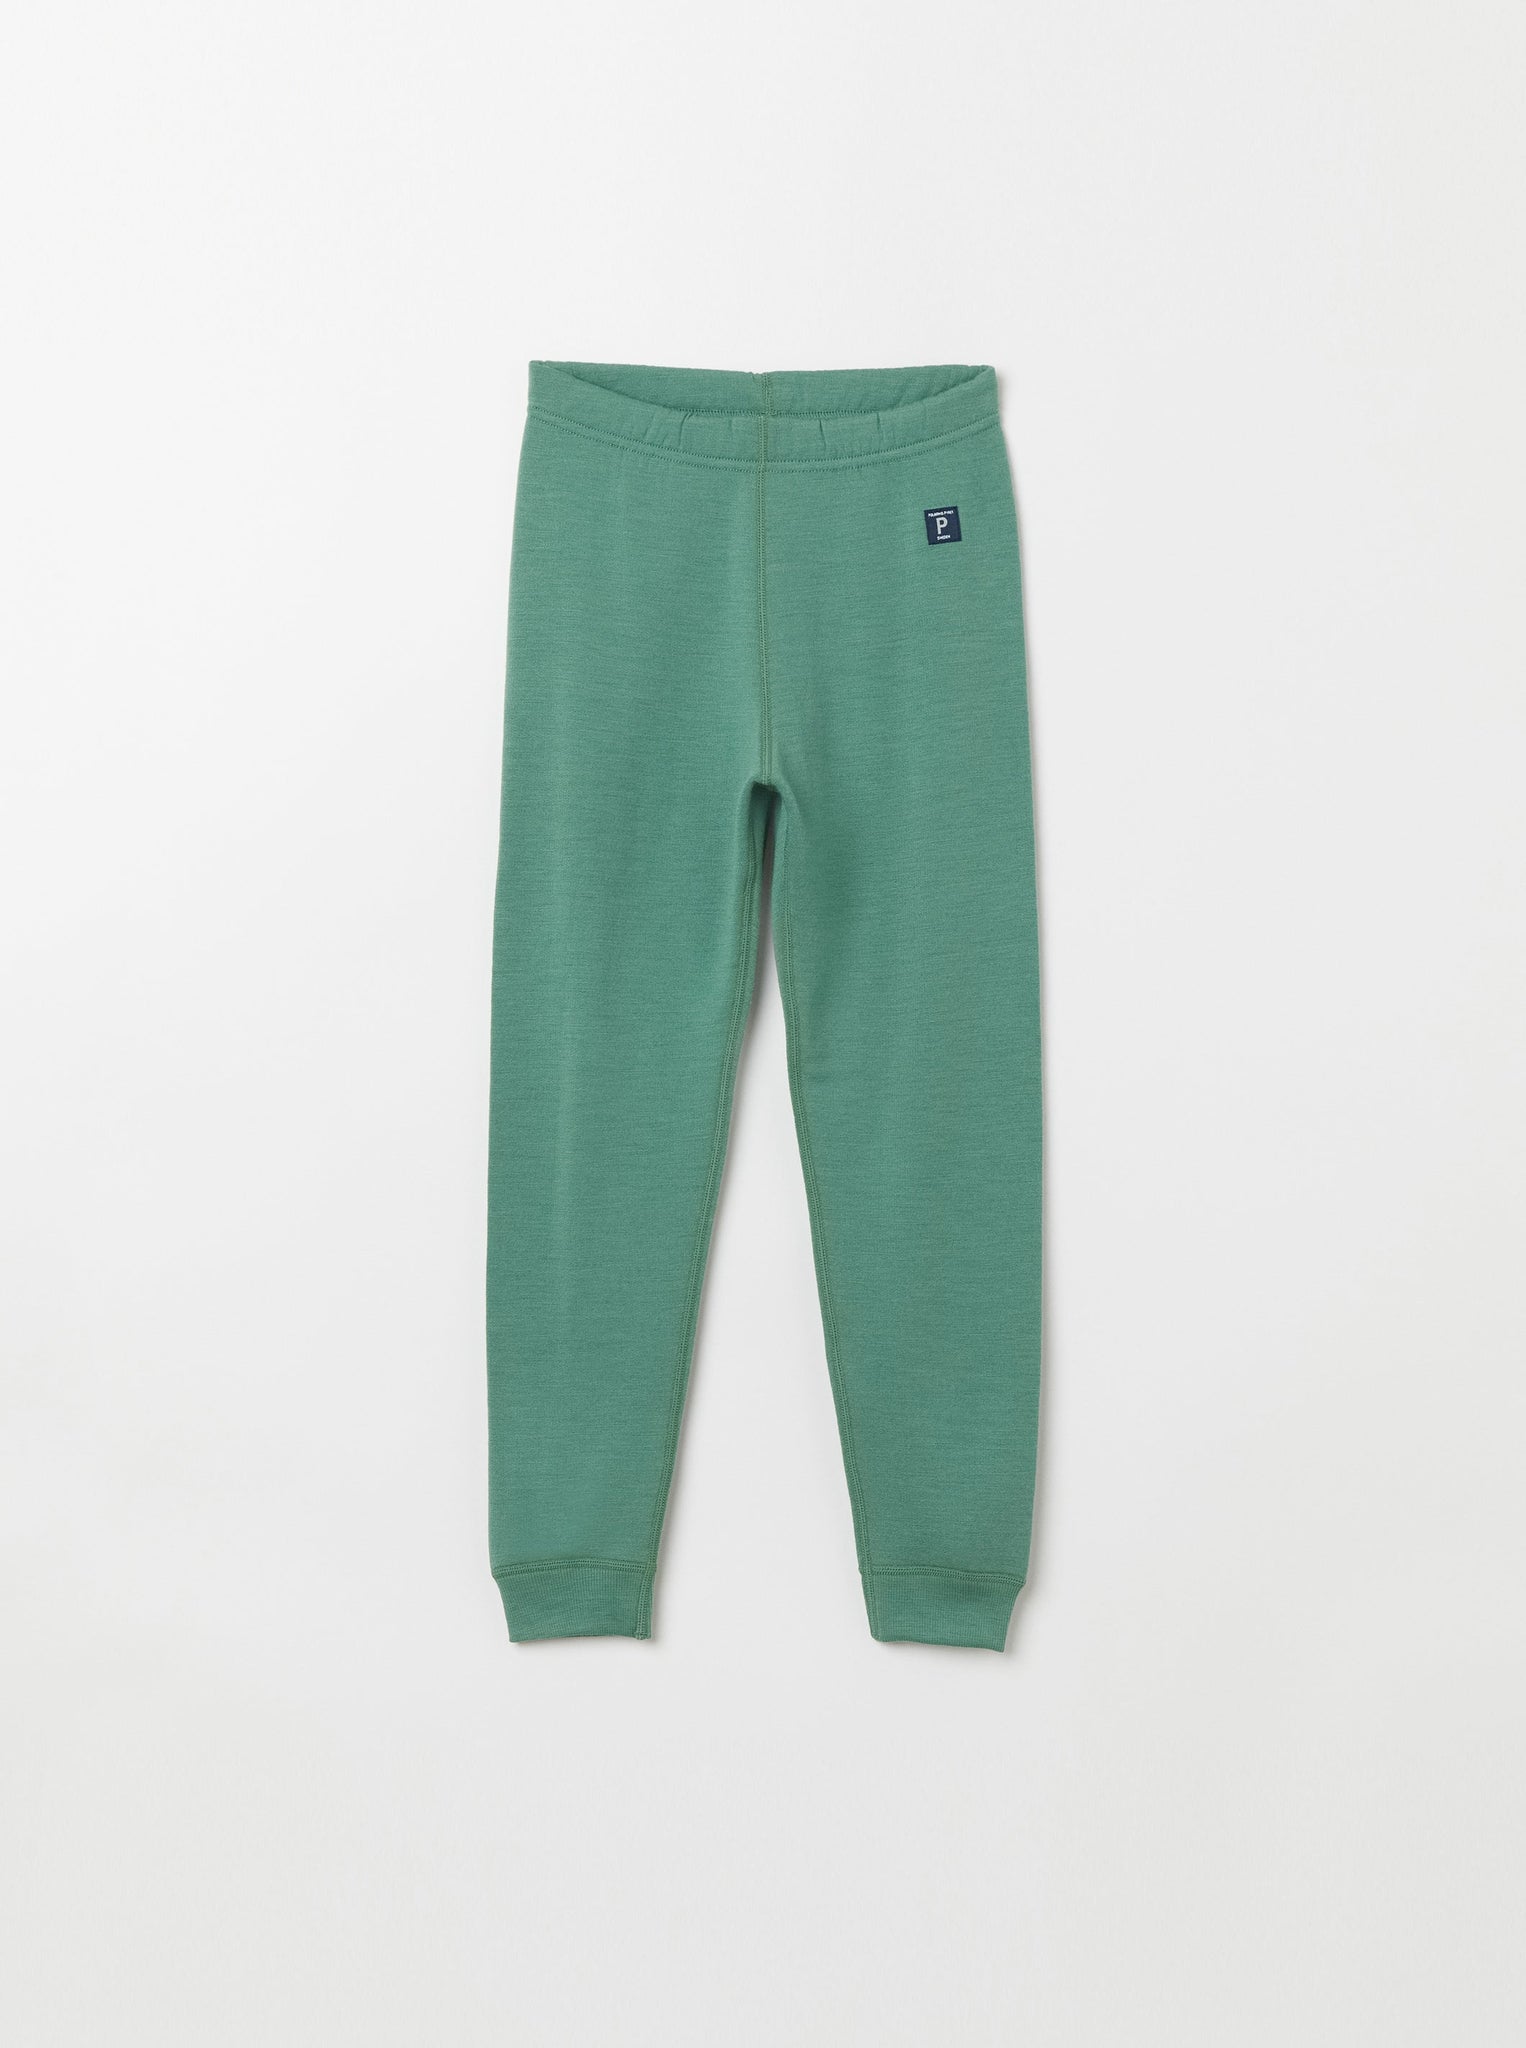 Green Merino Wool Kids Long Johns from the Polarn O. Pyret kidswear collection. Quality kids clothing made to last.